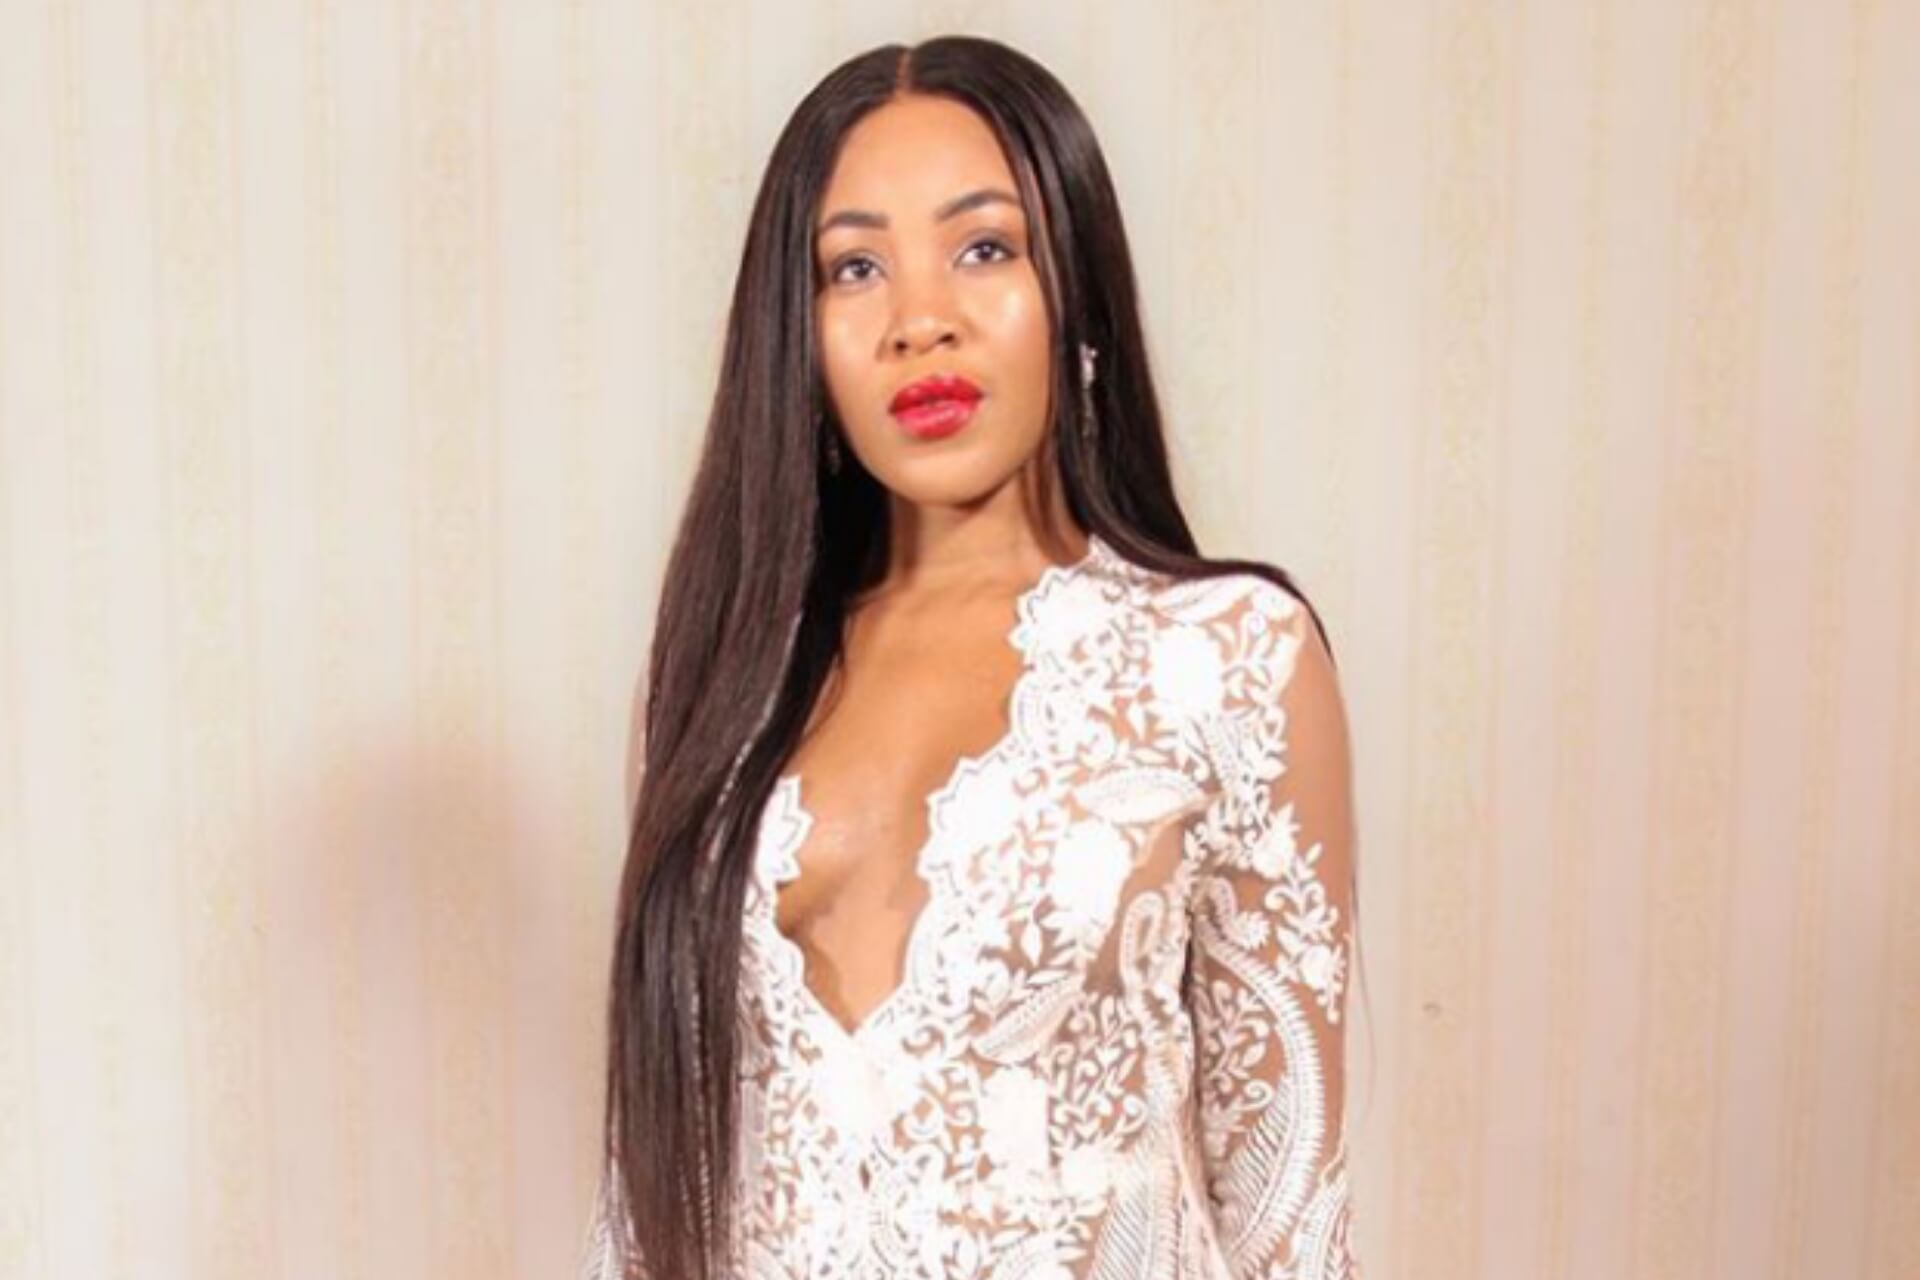 Erica releases official statement after BBNaija show